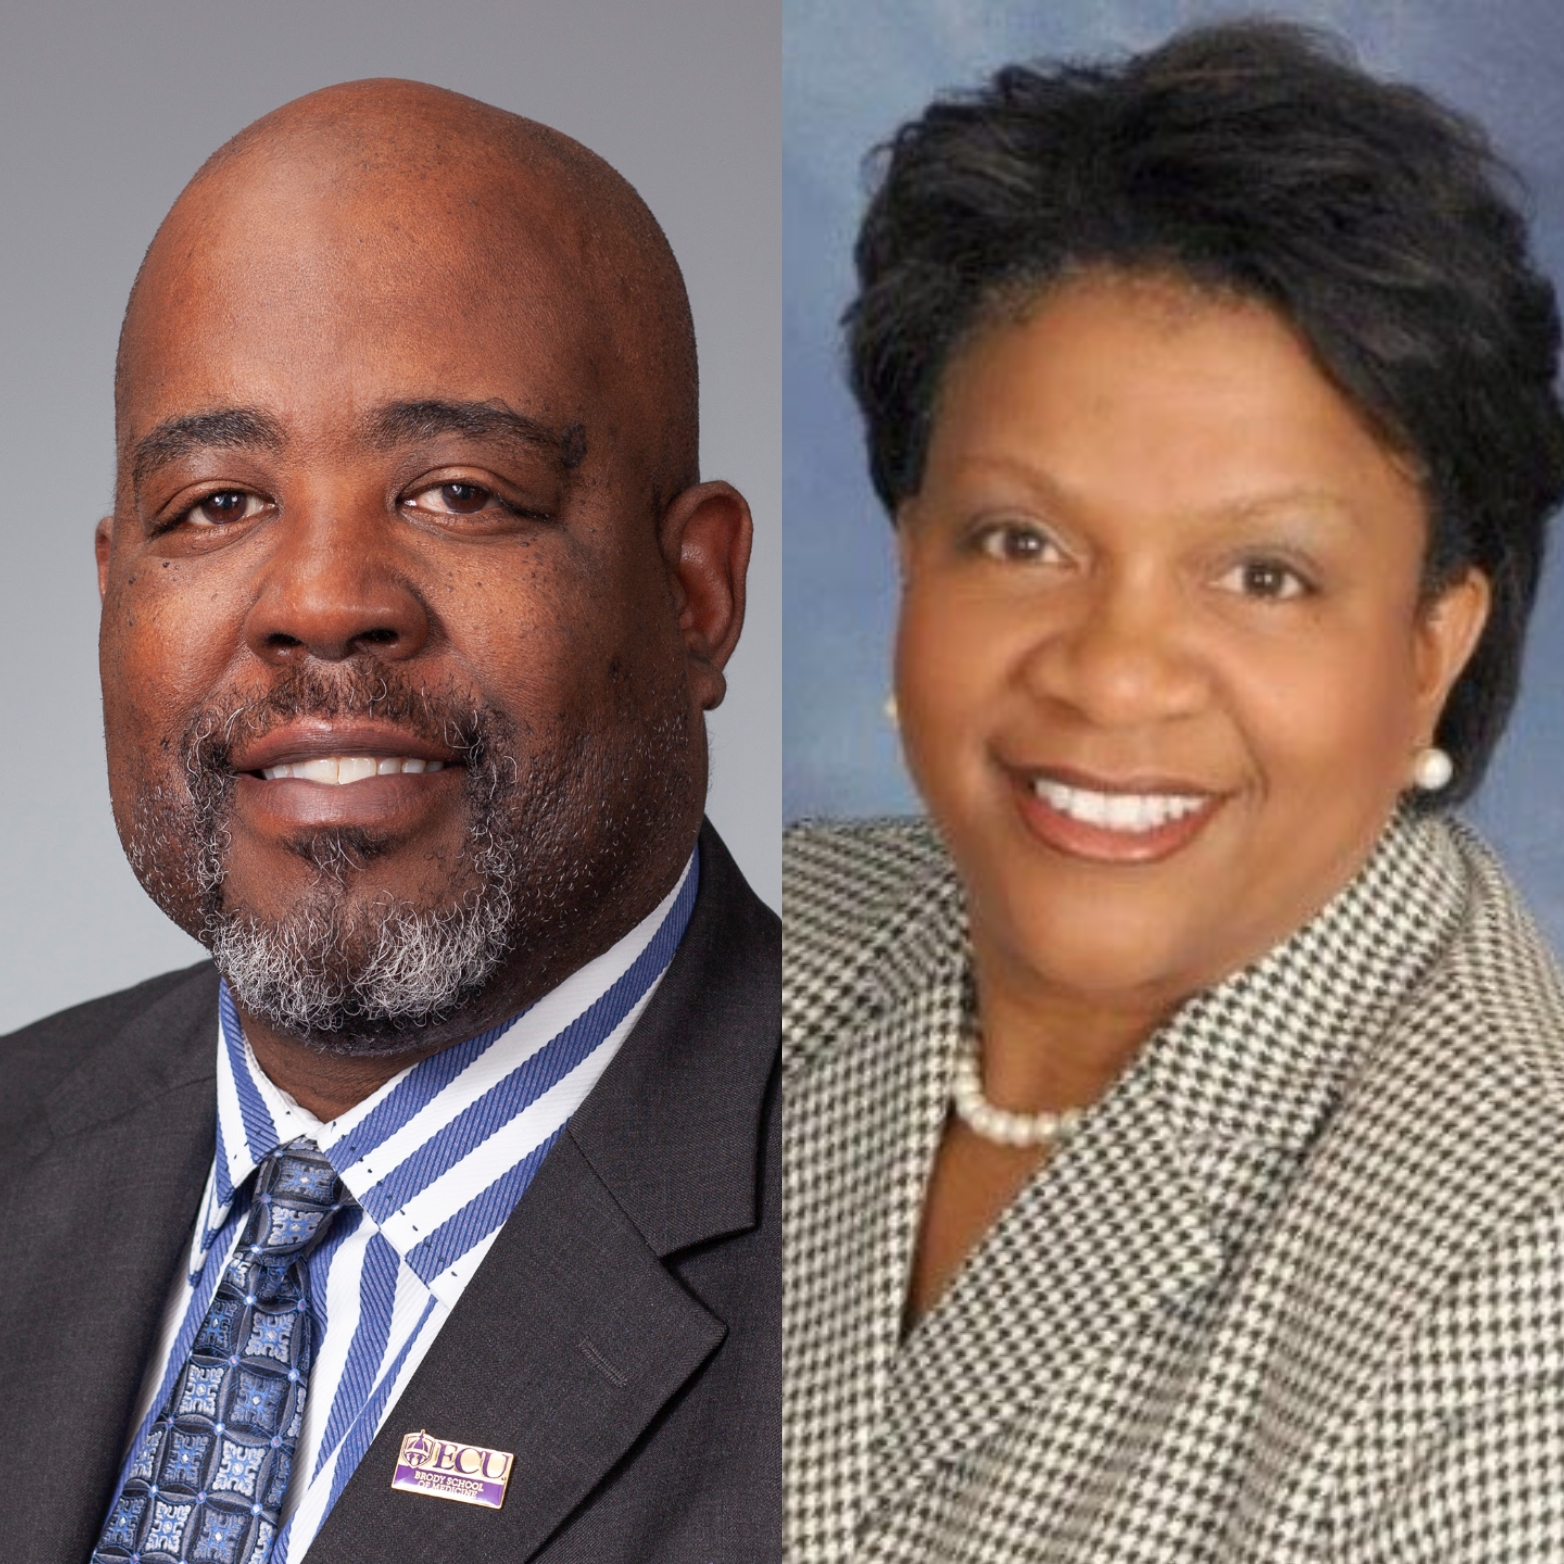 Cedric Bright, MD, associate dean for admissions, professor of internal medicine, and interim associate dean of diversity and inclusion at East Carolina University’s Brody School of Medicine, and ATSU’s Kim Butler Perry, DDS, MSCS, FACD, associate vice president of university strategic partnerships